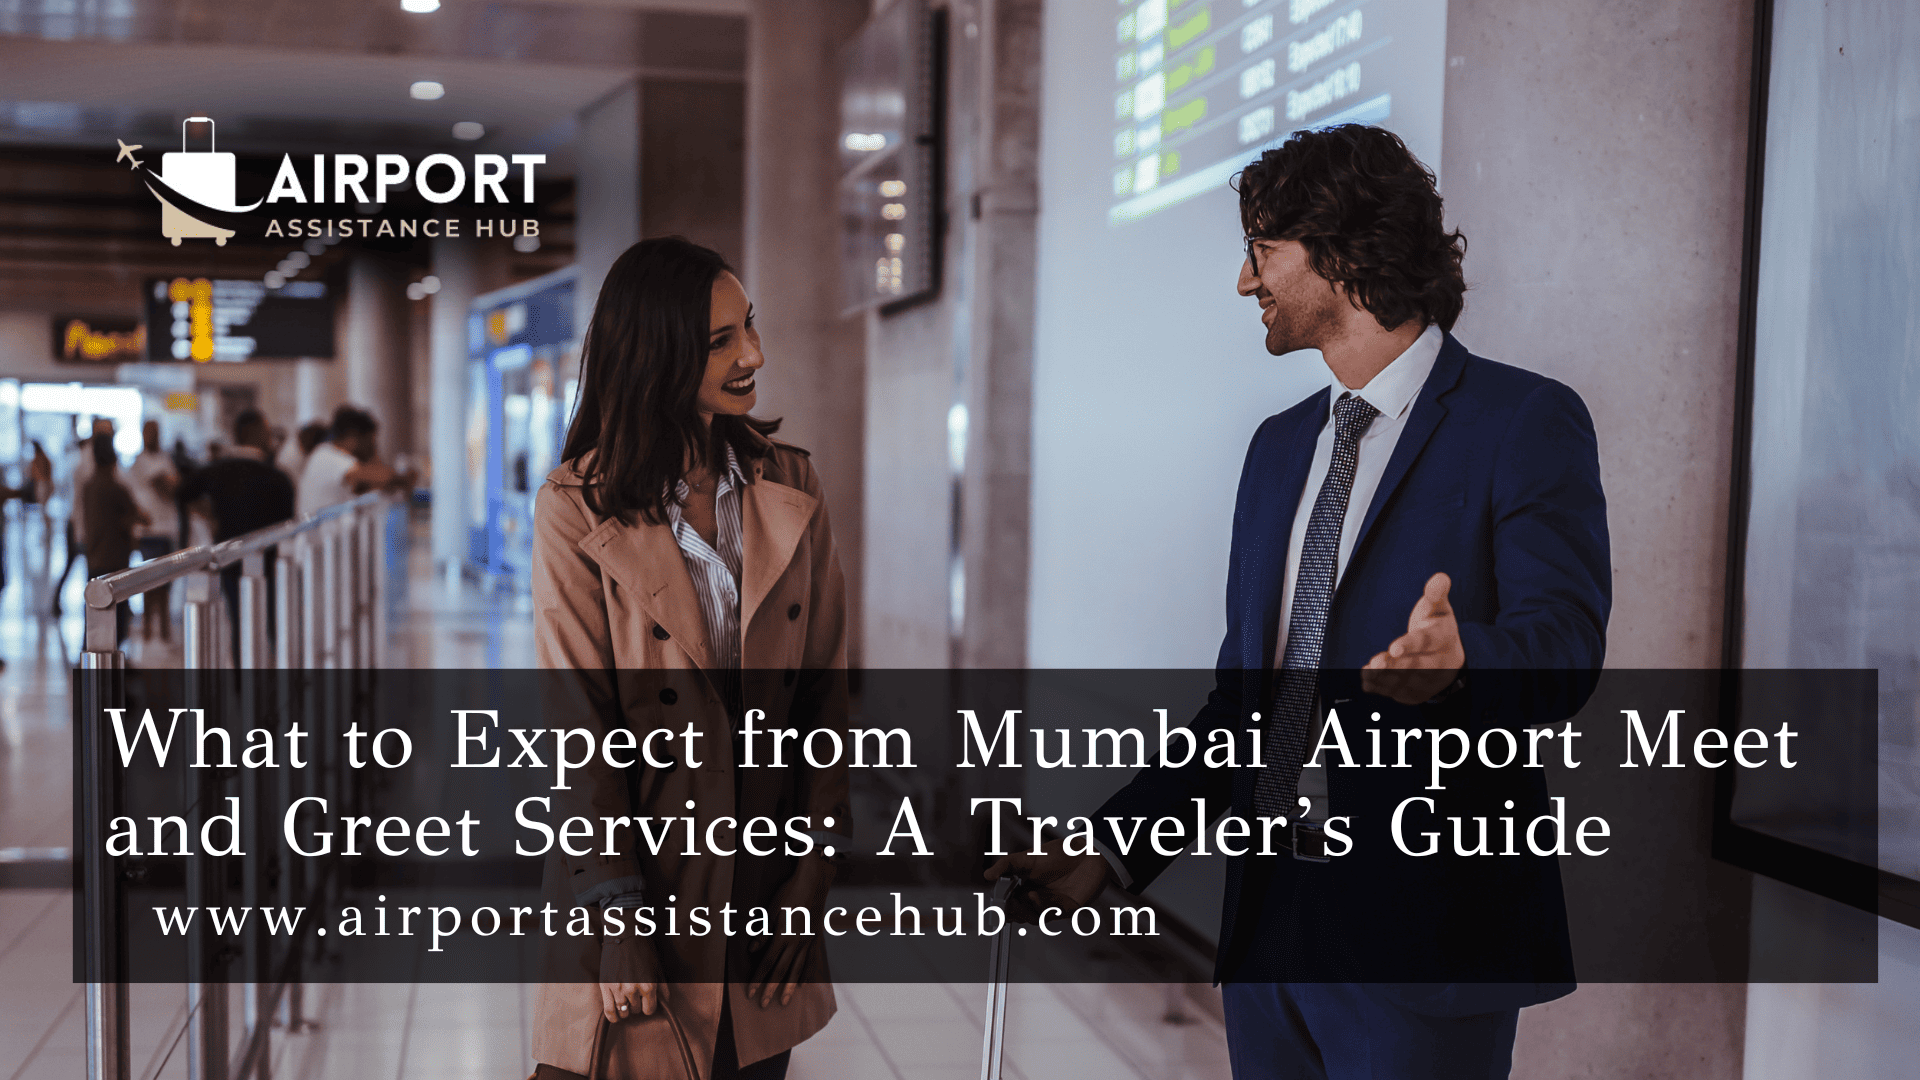 What to Expect from Mumbai Airport Meet and Greet Services: A Traveler’s Guide